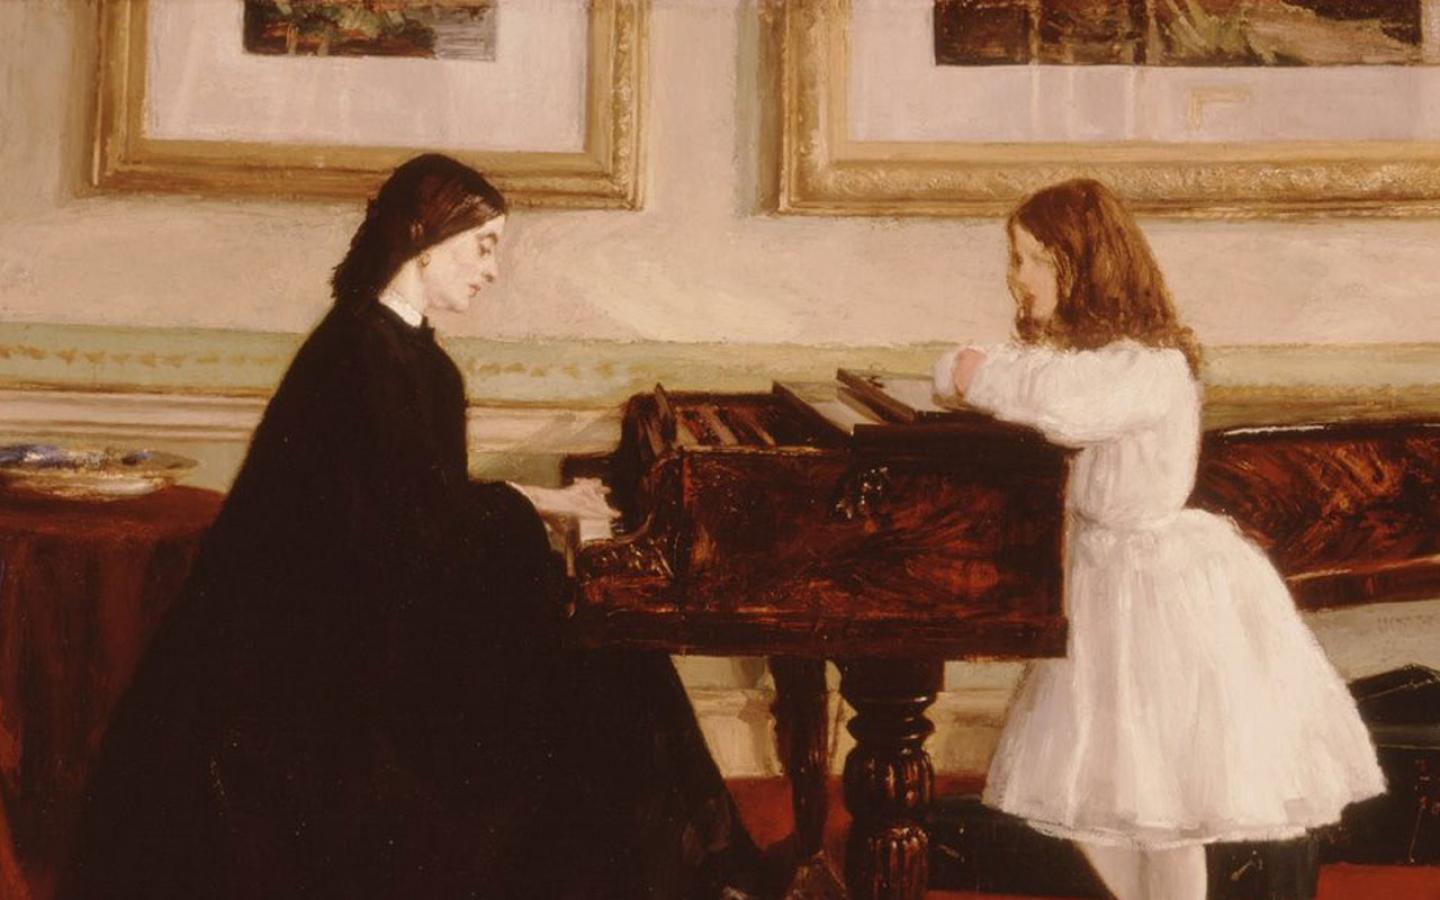 James McNeill Whistler - At the Piano (1859) Wallpaper #1 1440 x 900 